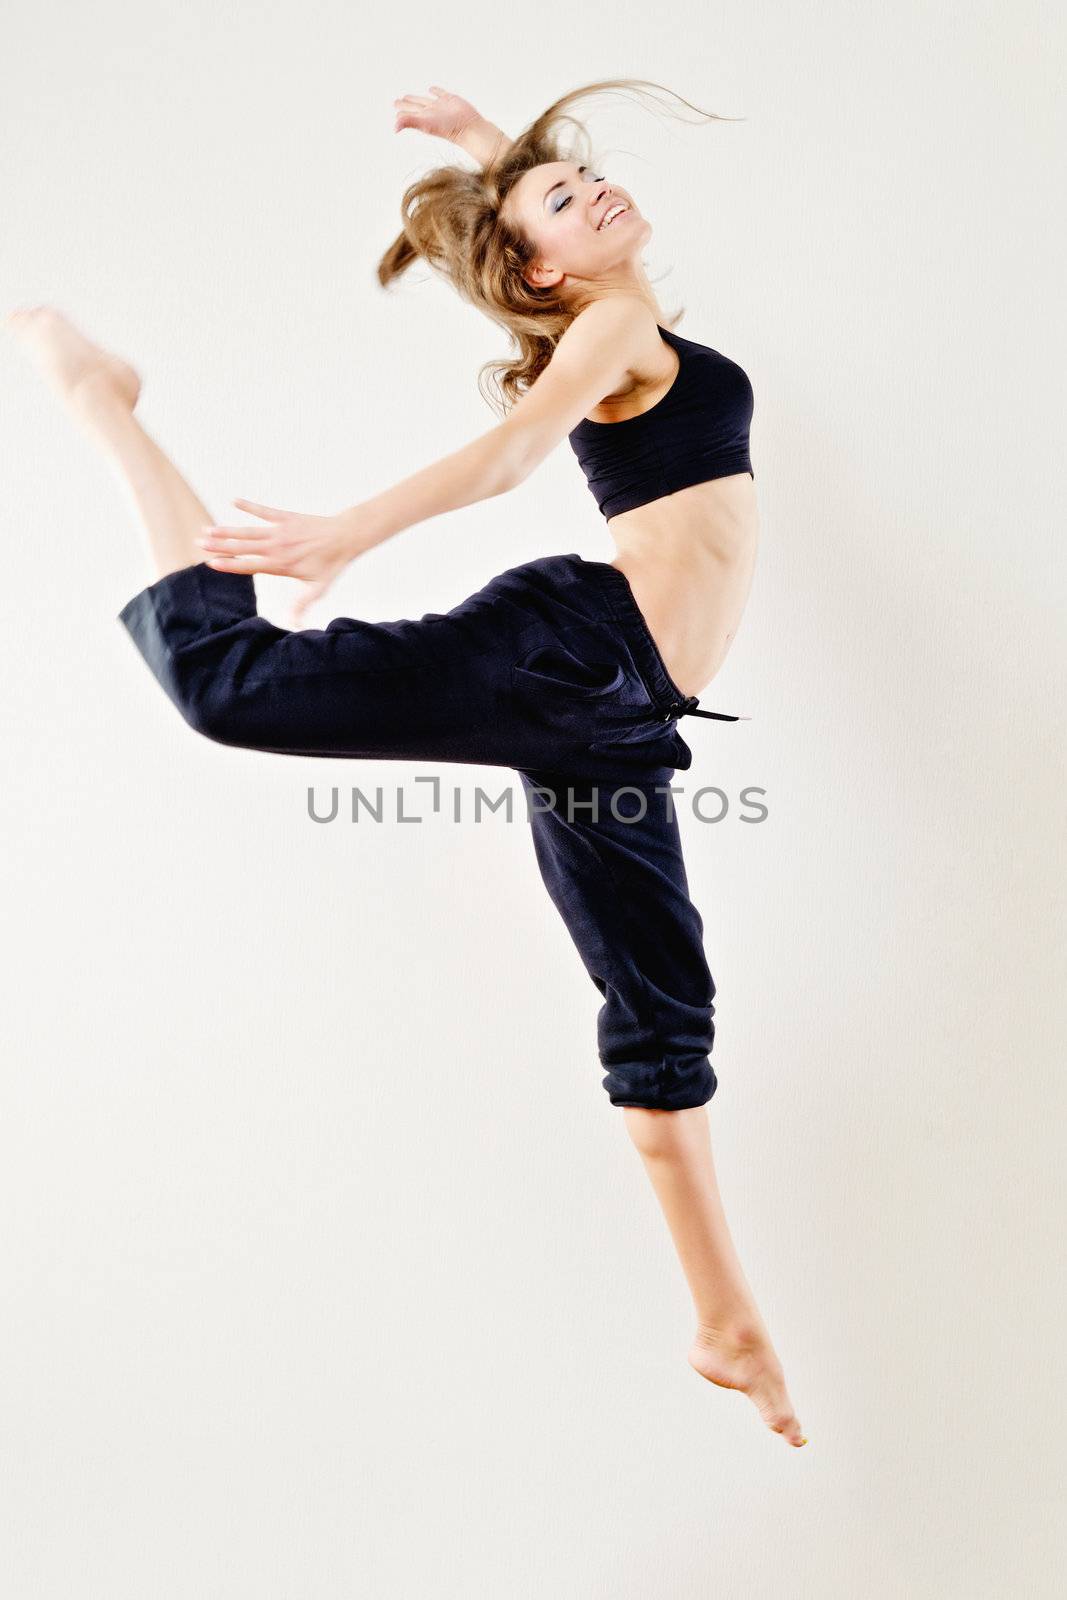 Young woman in tracksuit jumping on white background